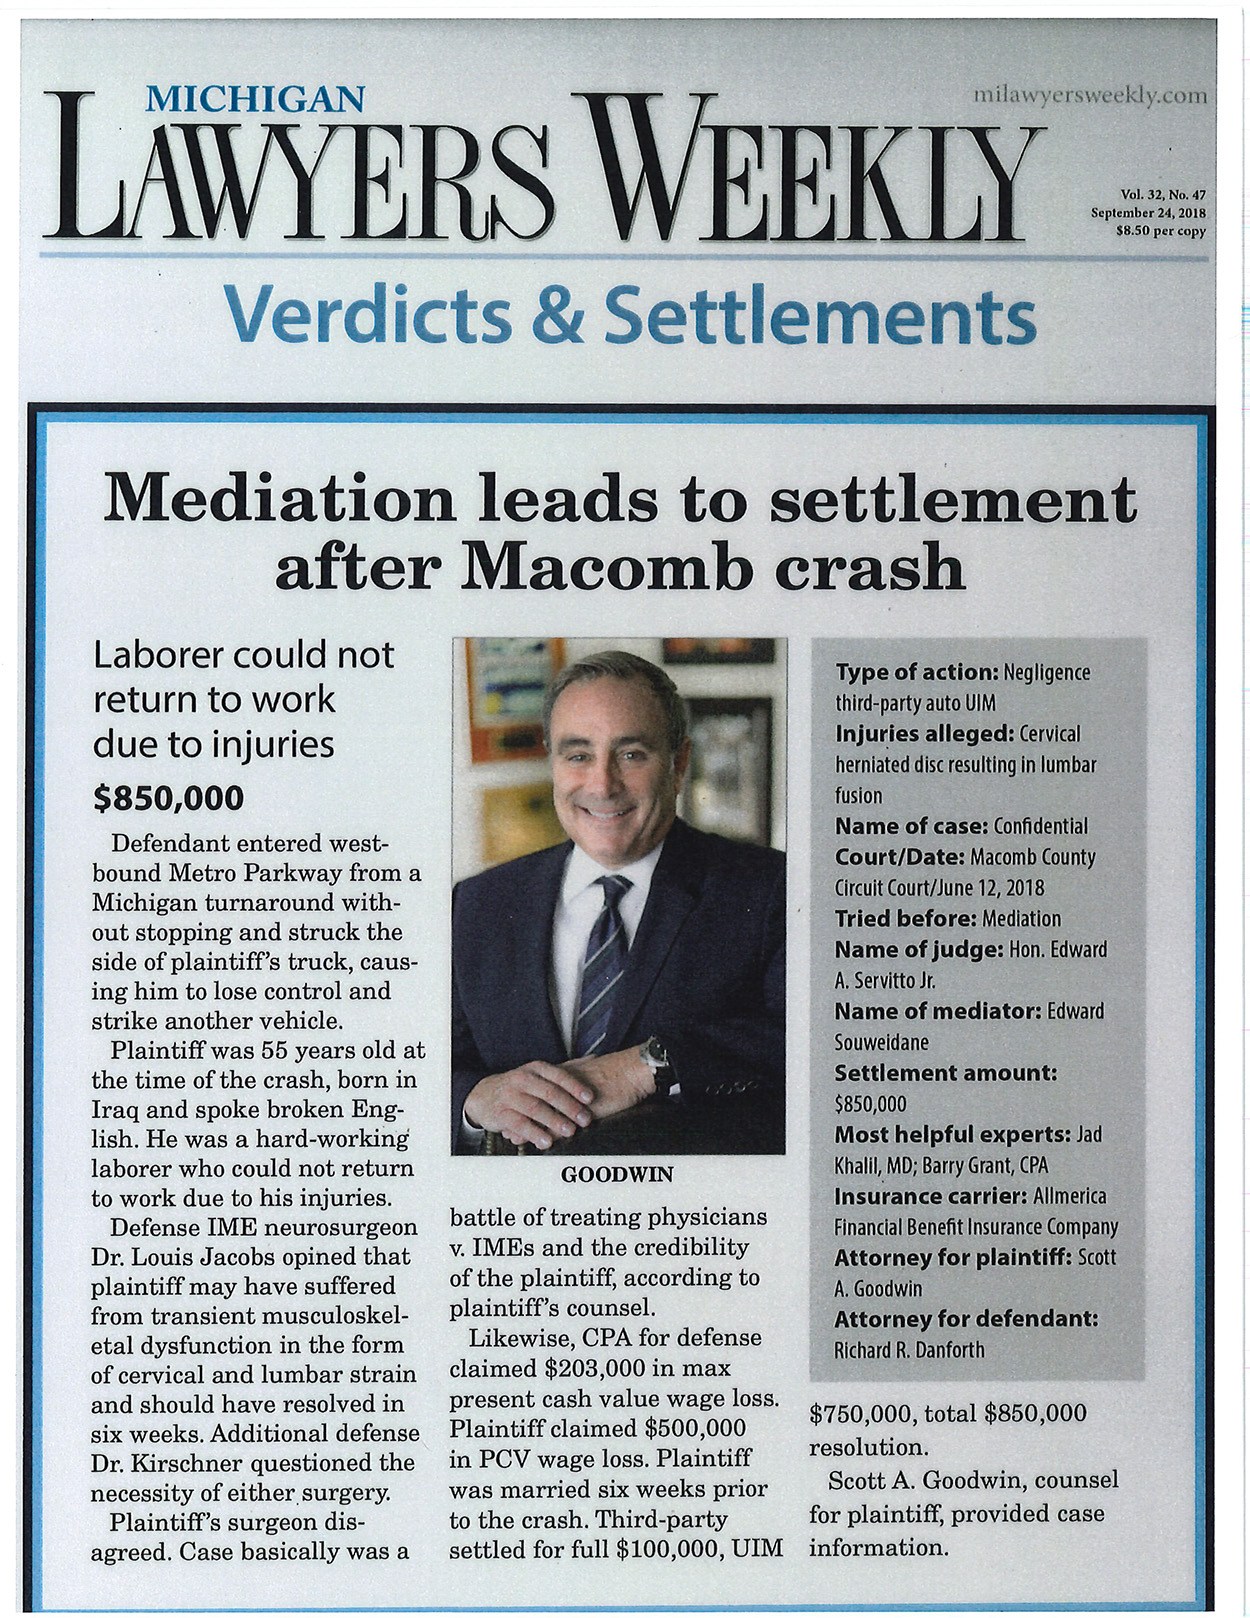 Michigan Lawyers Weekly article discussing Scott Goodwin's settlement for a car accident victim